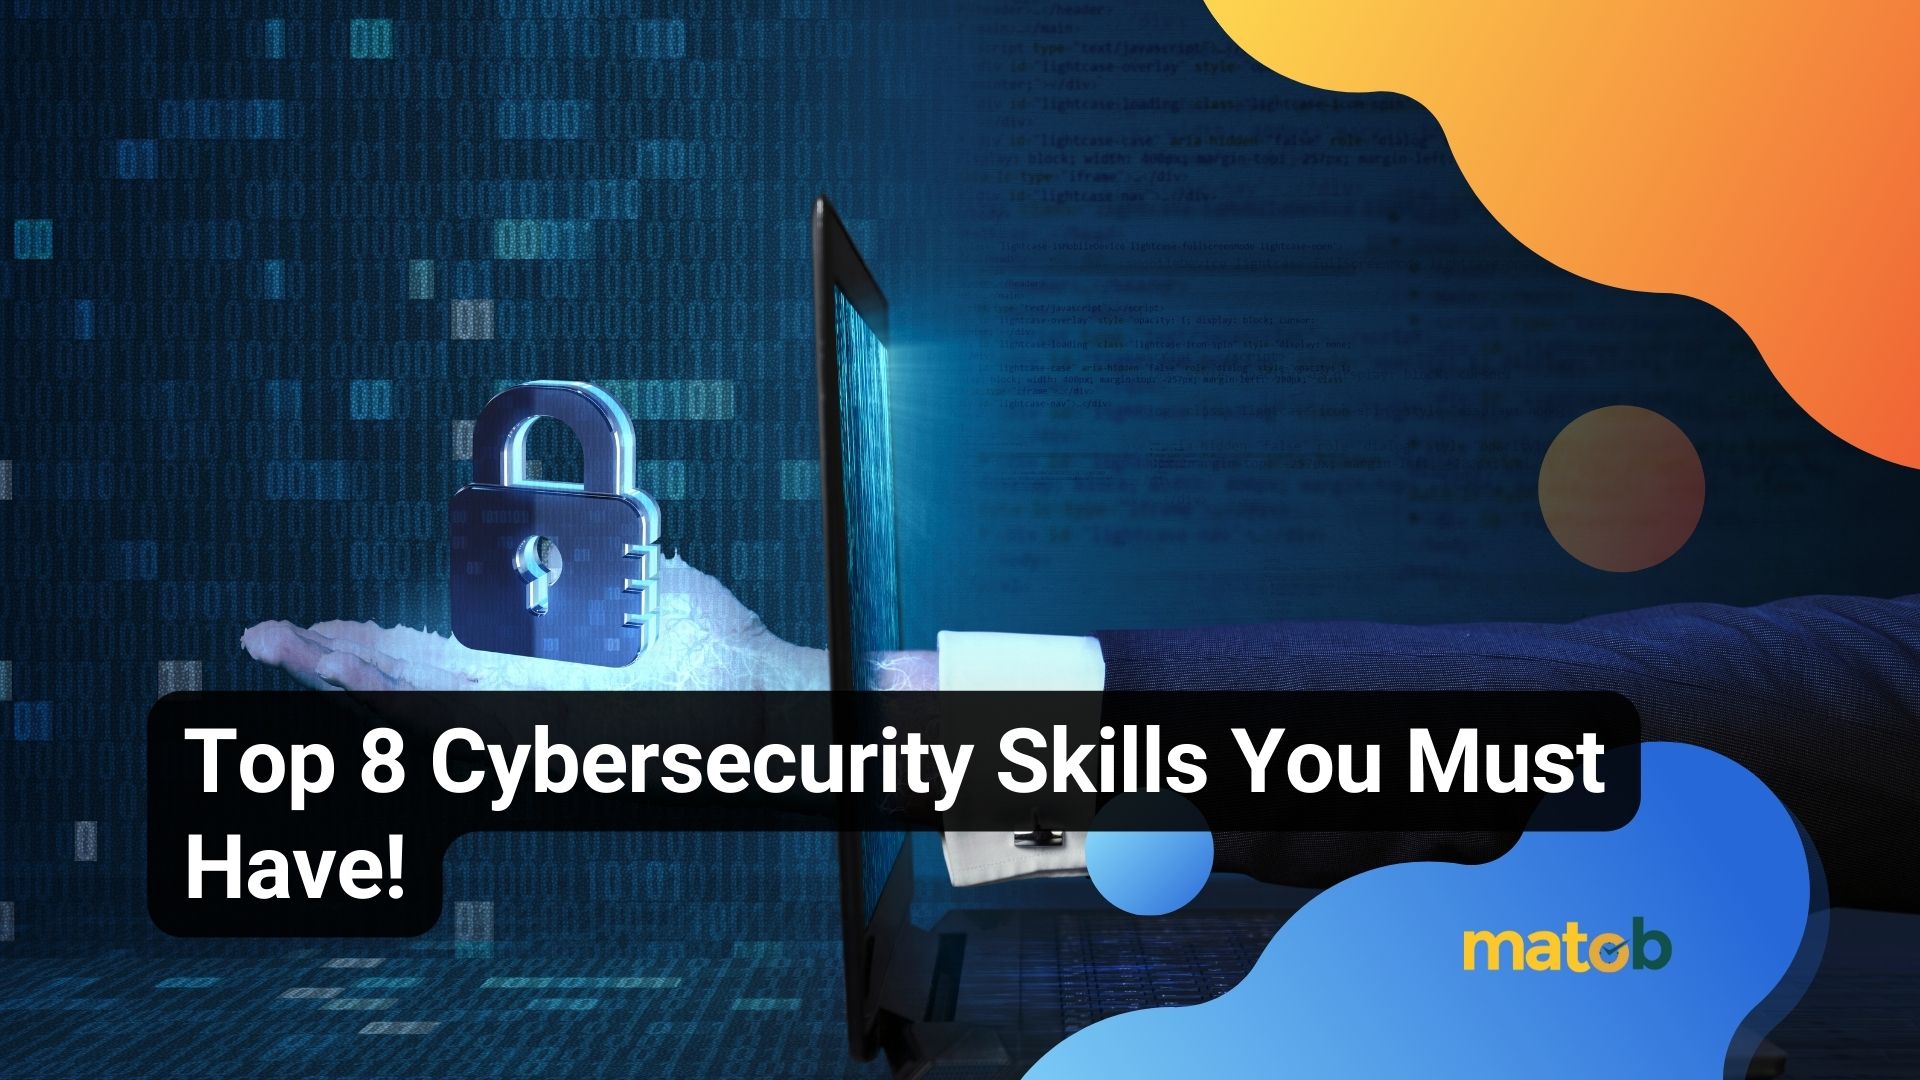 Top 8 Cybersecurity Skills You Must Have!